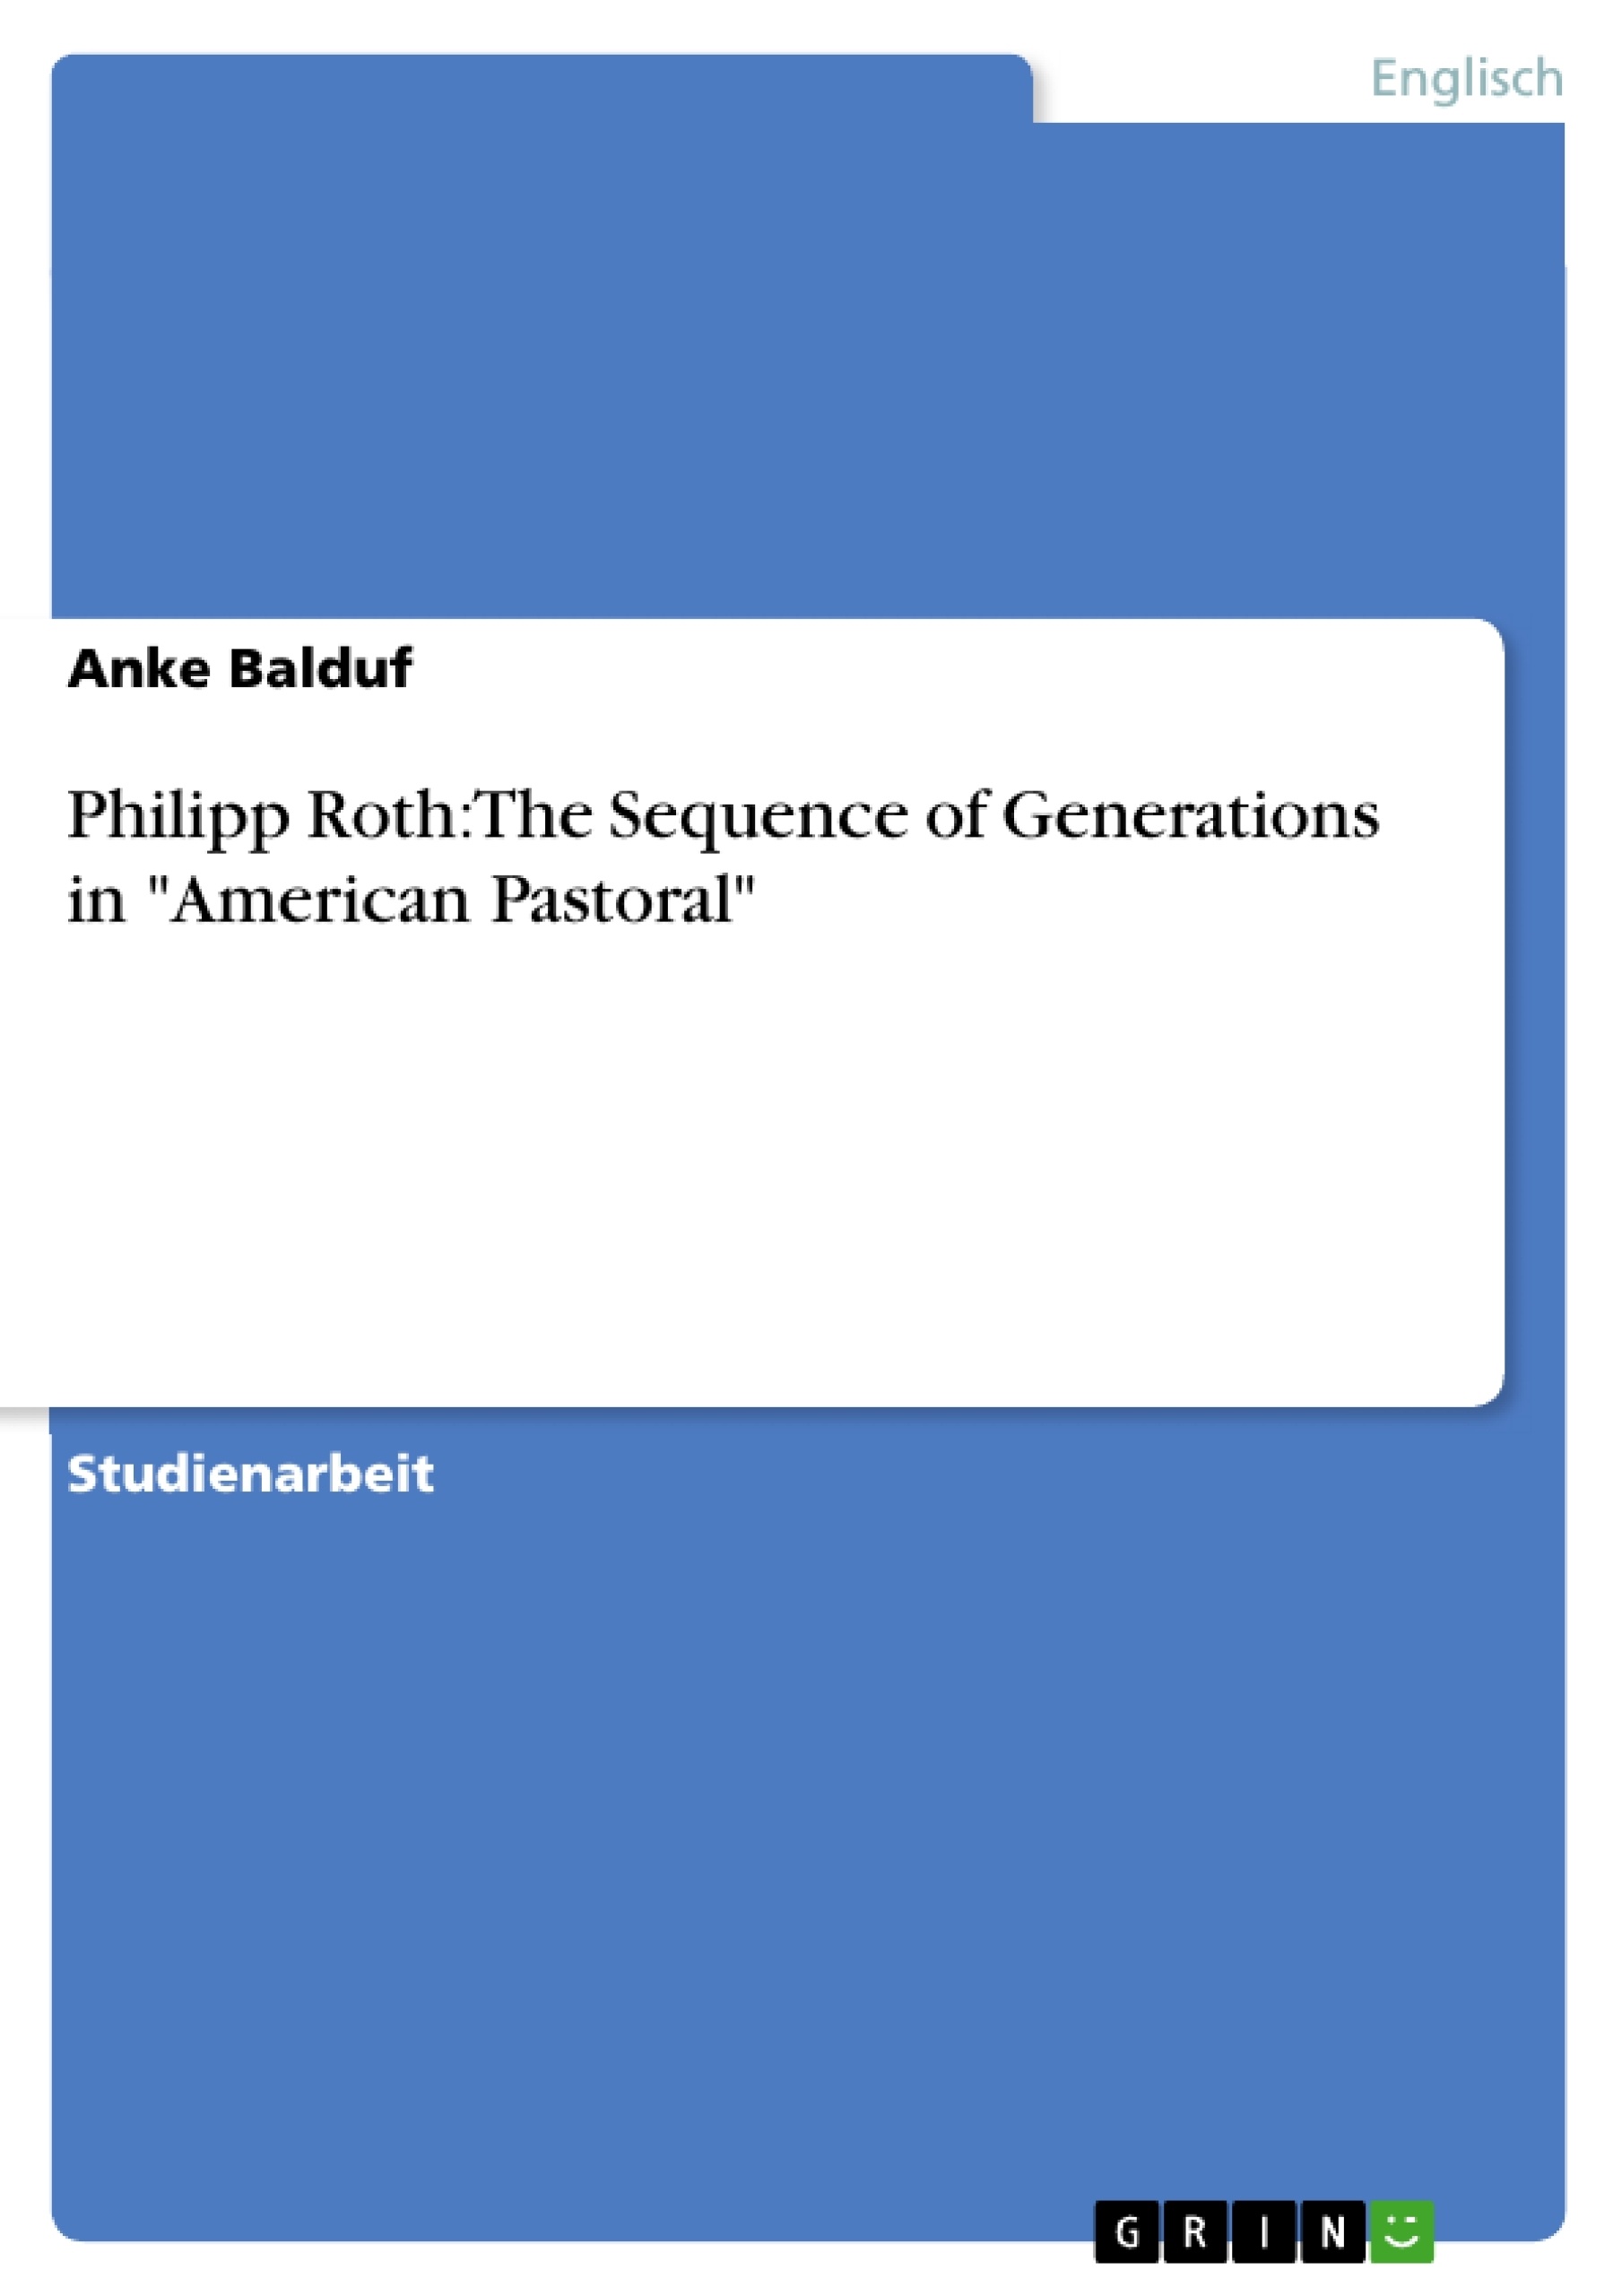 Titre: Philipp Roth: The Sequence of Generations in "American Pastoral"